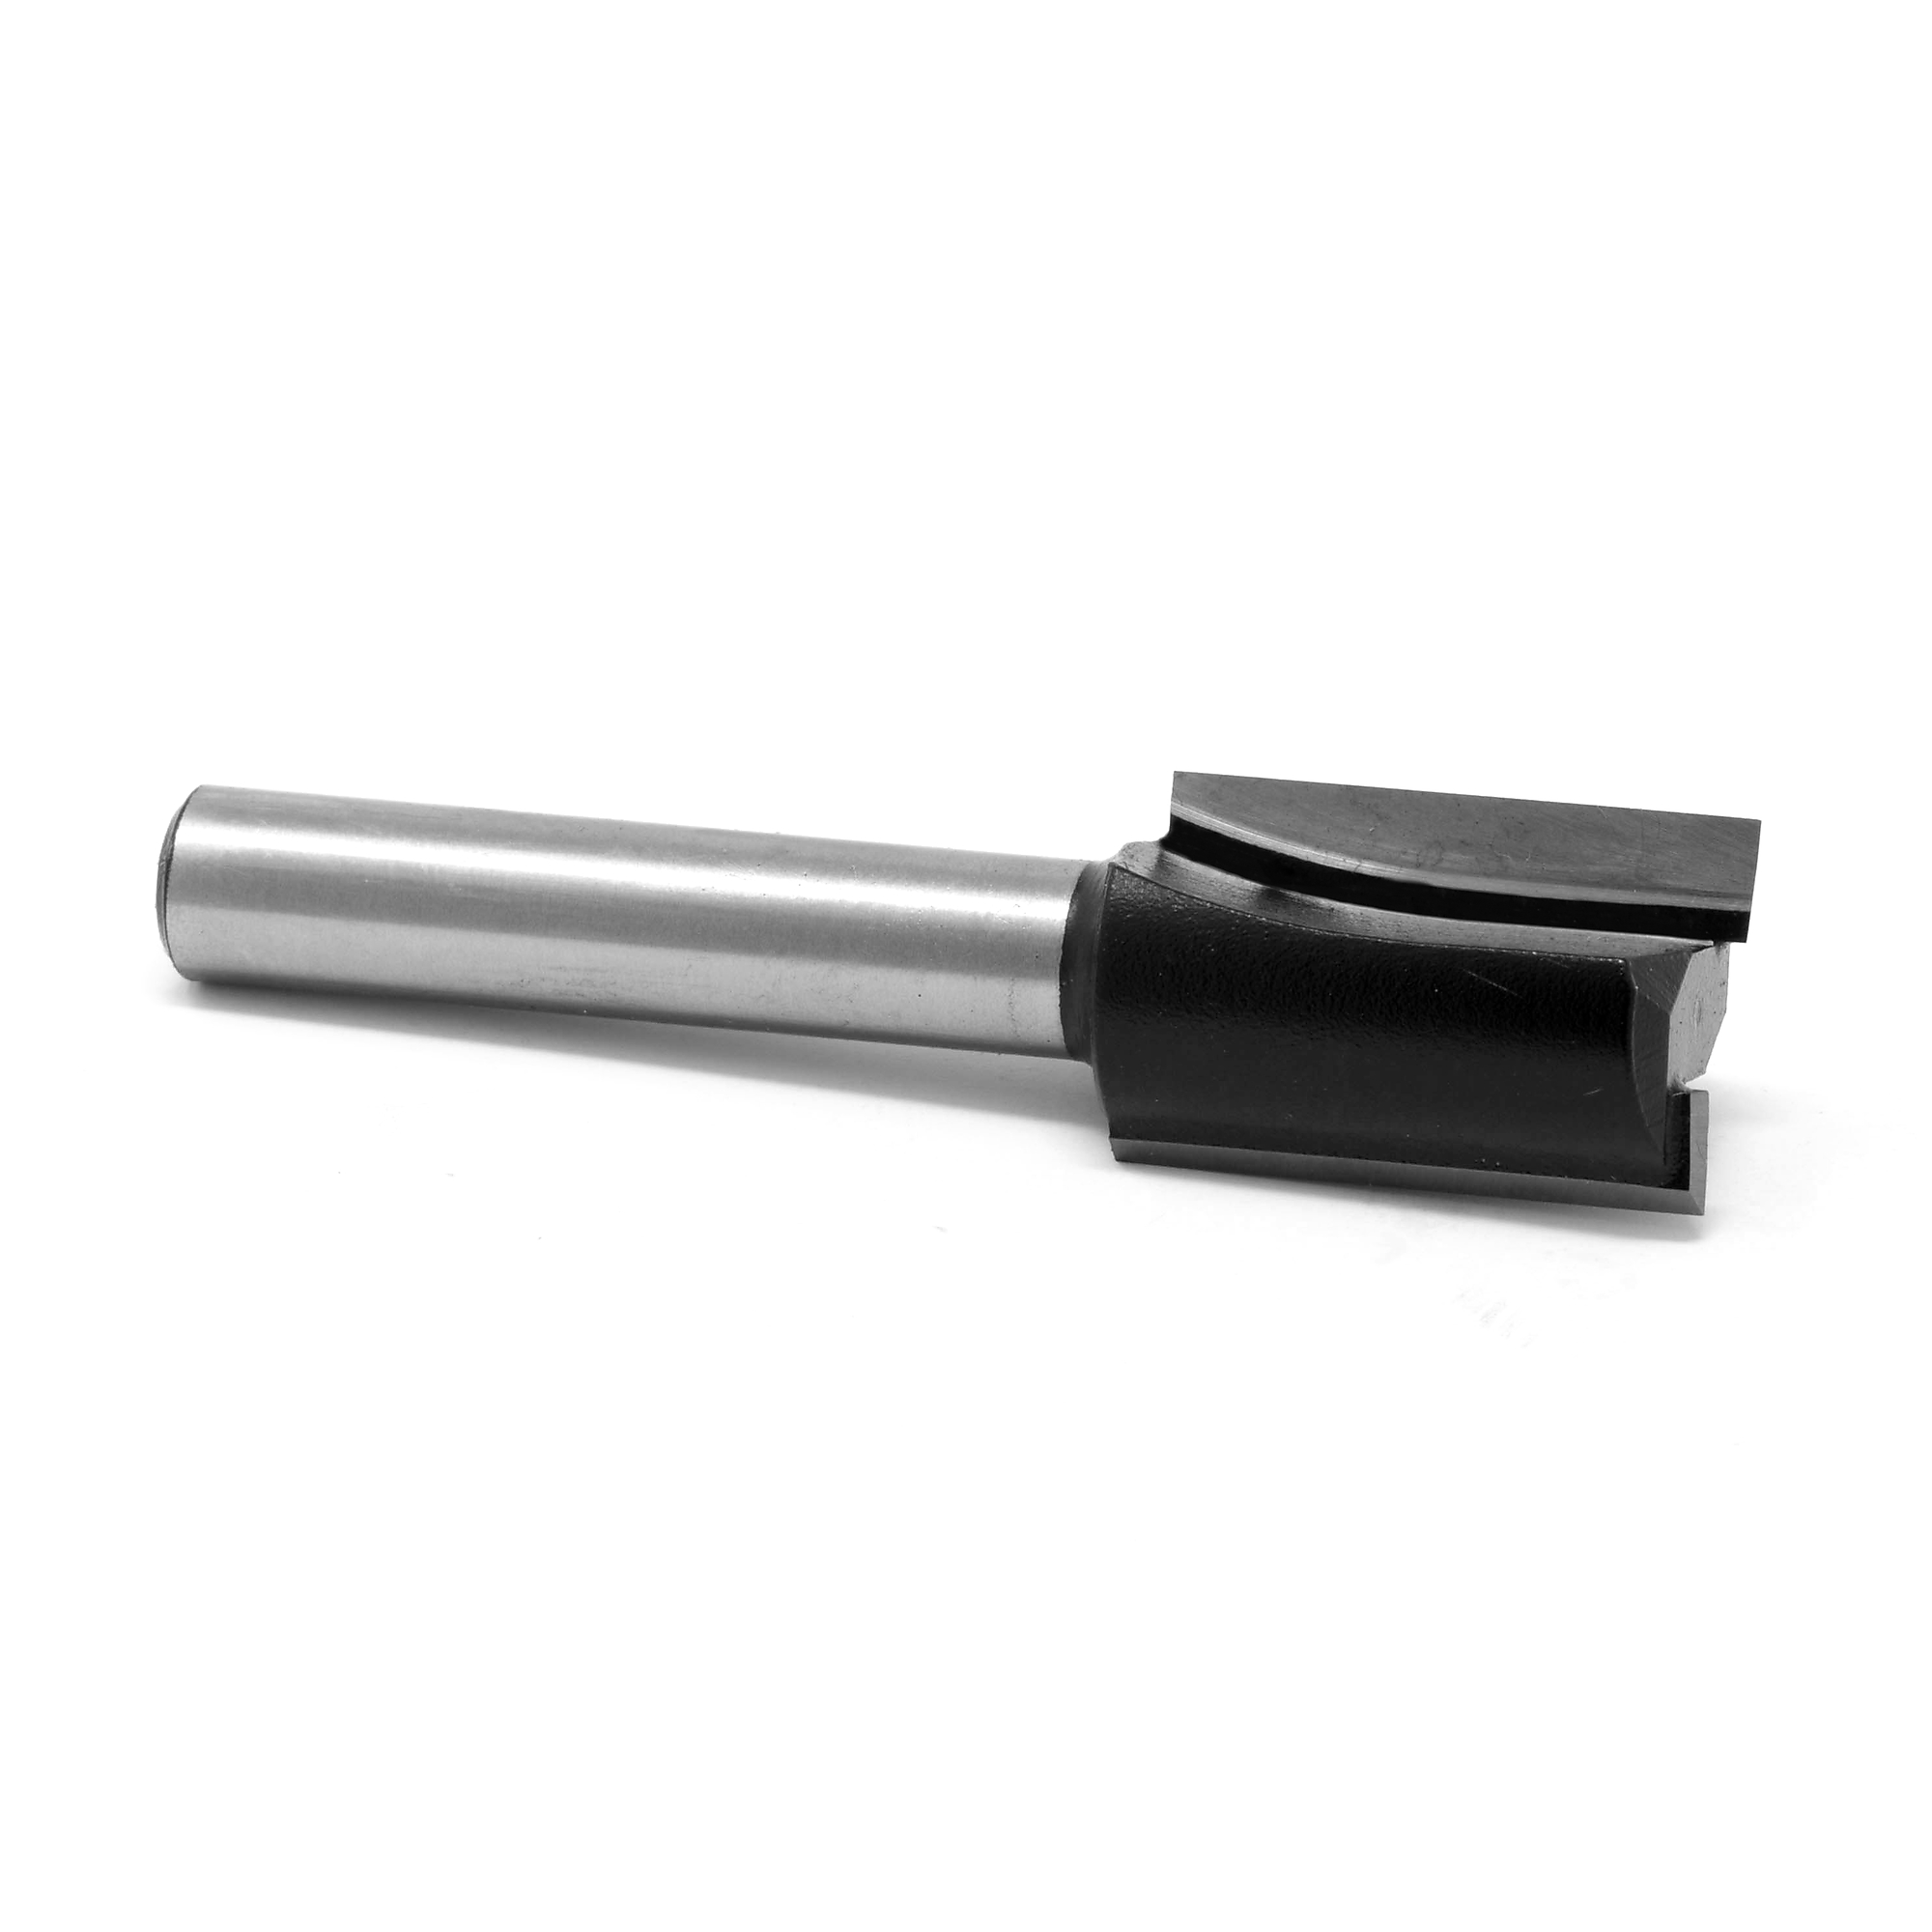 WEN, 1/2Inch Straight 2-Flute Carbide-Tipped Router Bit, Shank Size 1/4 in, Bit Diameter 1/2 in, Model RB107FF